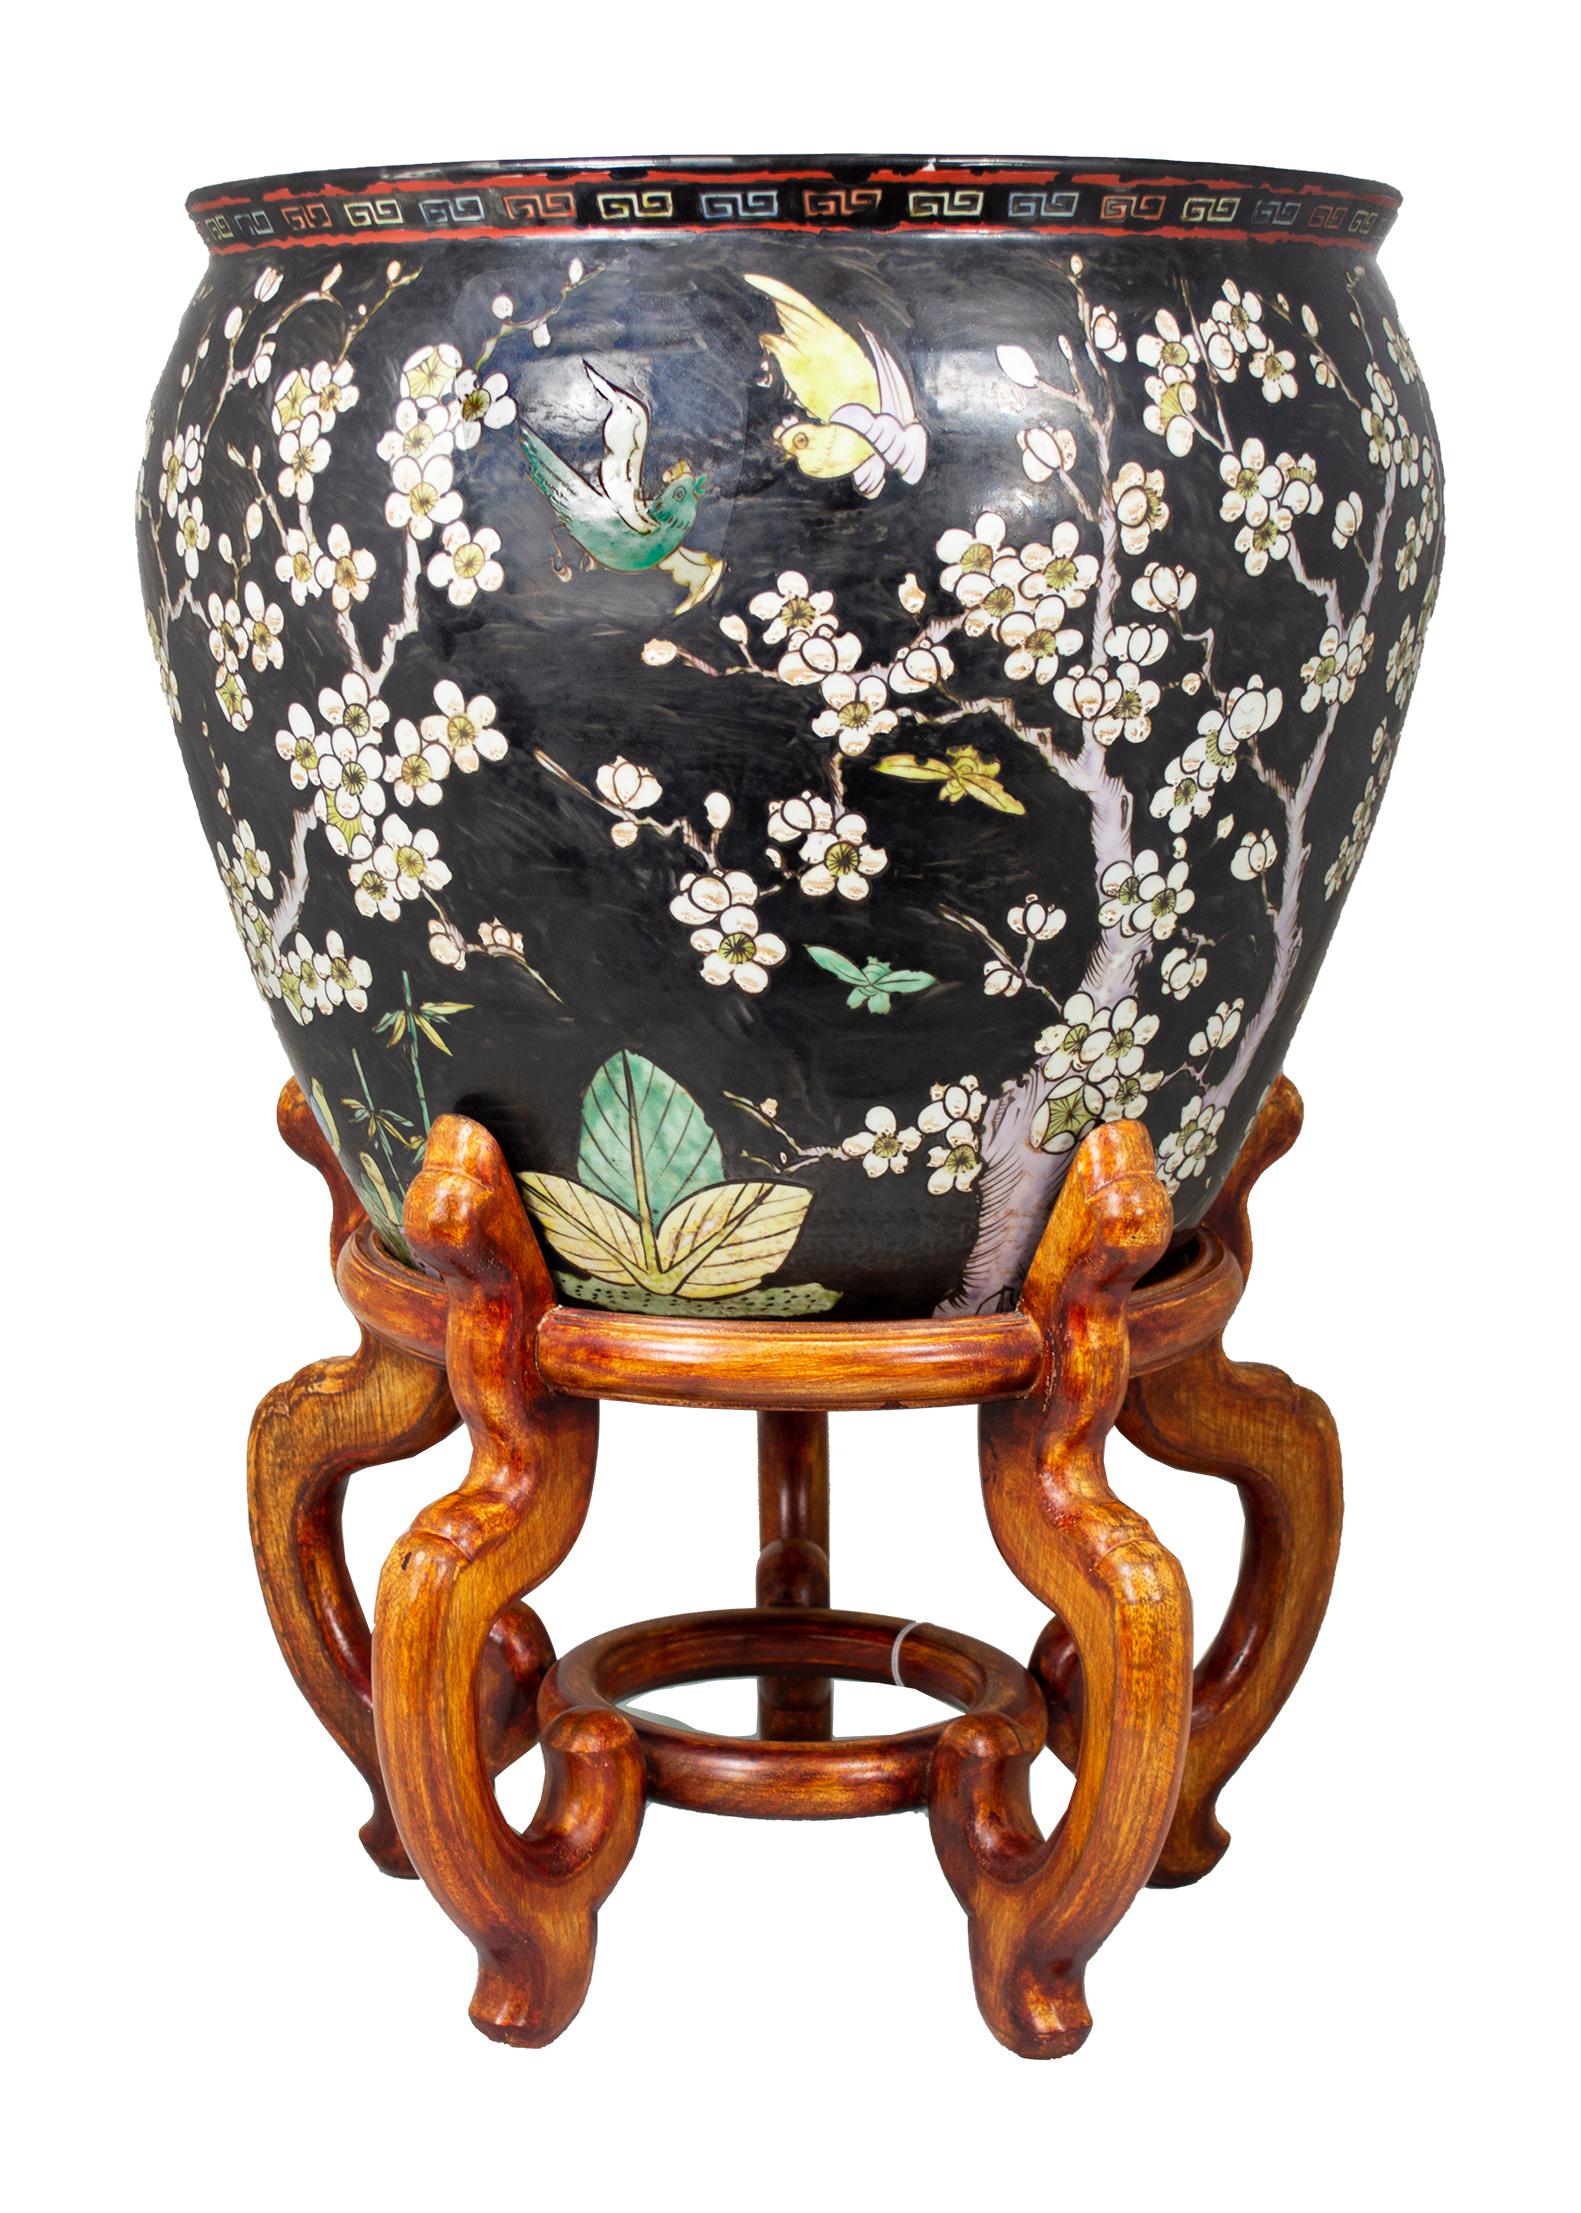 Cachepot in porcelain with famille noire enamel decorations Kangxi mark - Art by Unknown